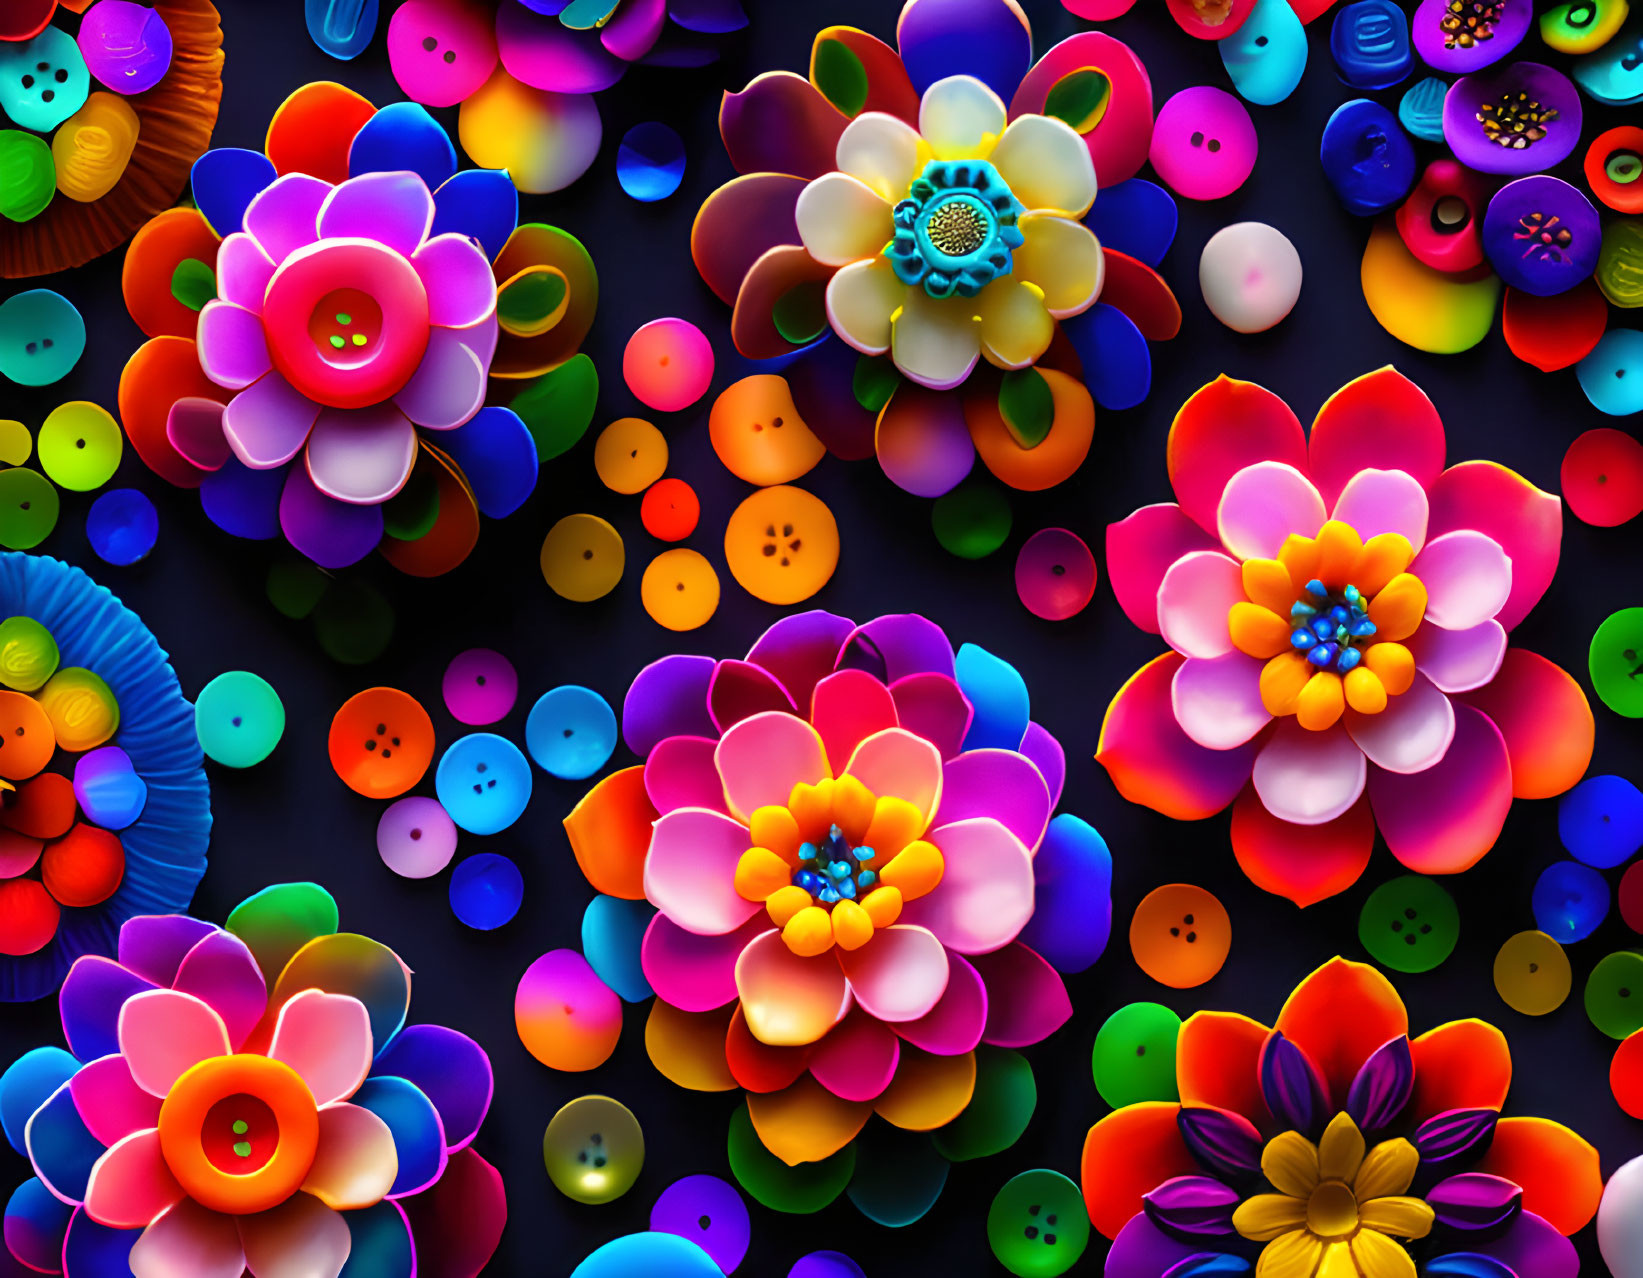 Colorful Paper Flowers with Buttons on Dark Background